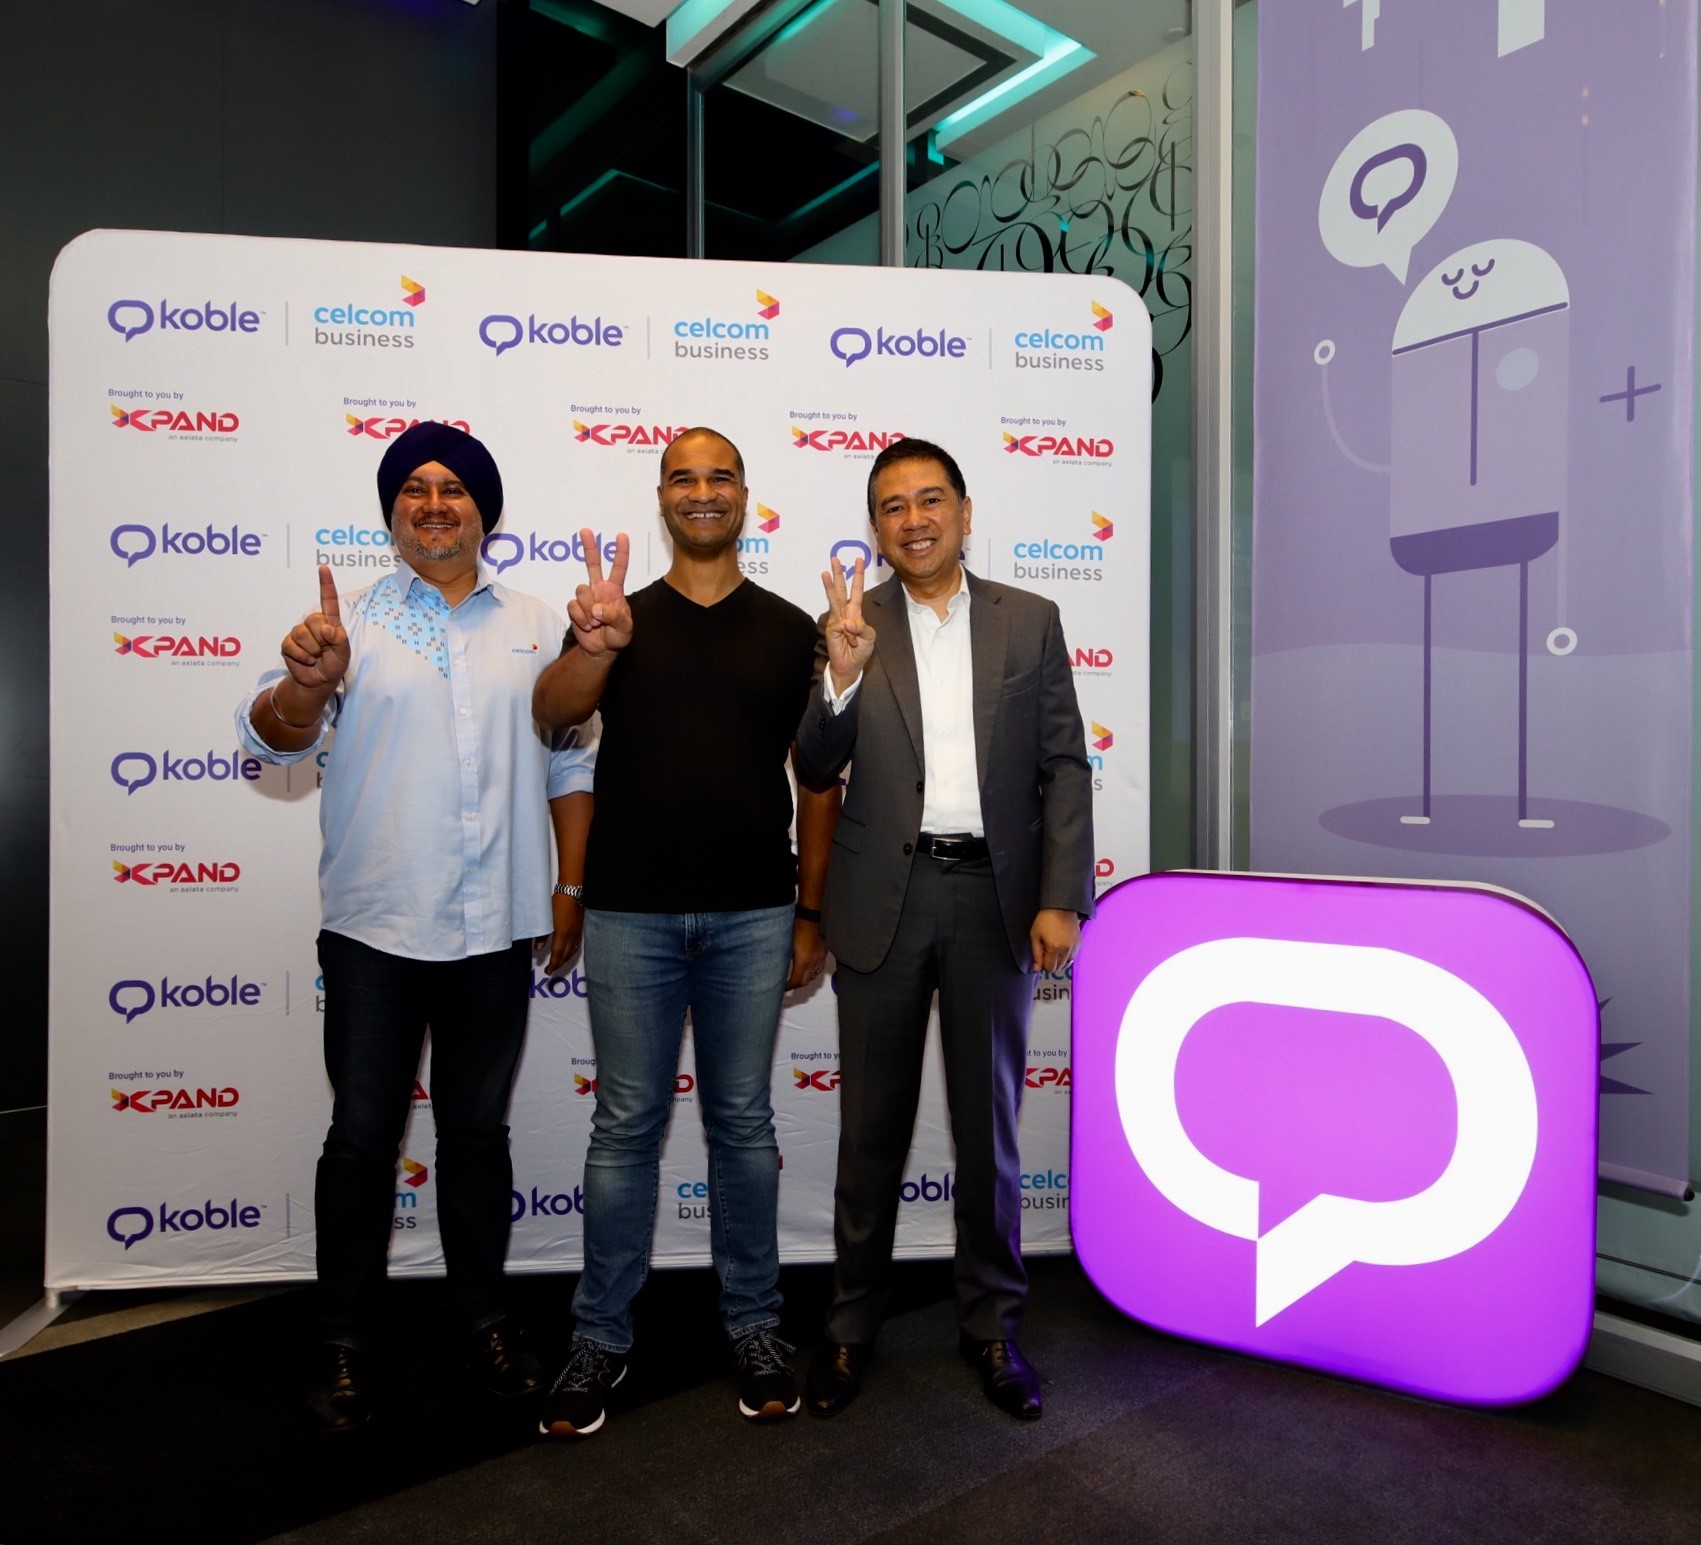 Celcom launches Koble, a business-to-business matchmaking platform 1